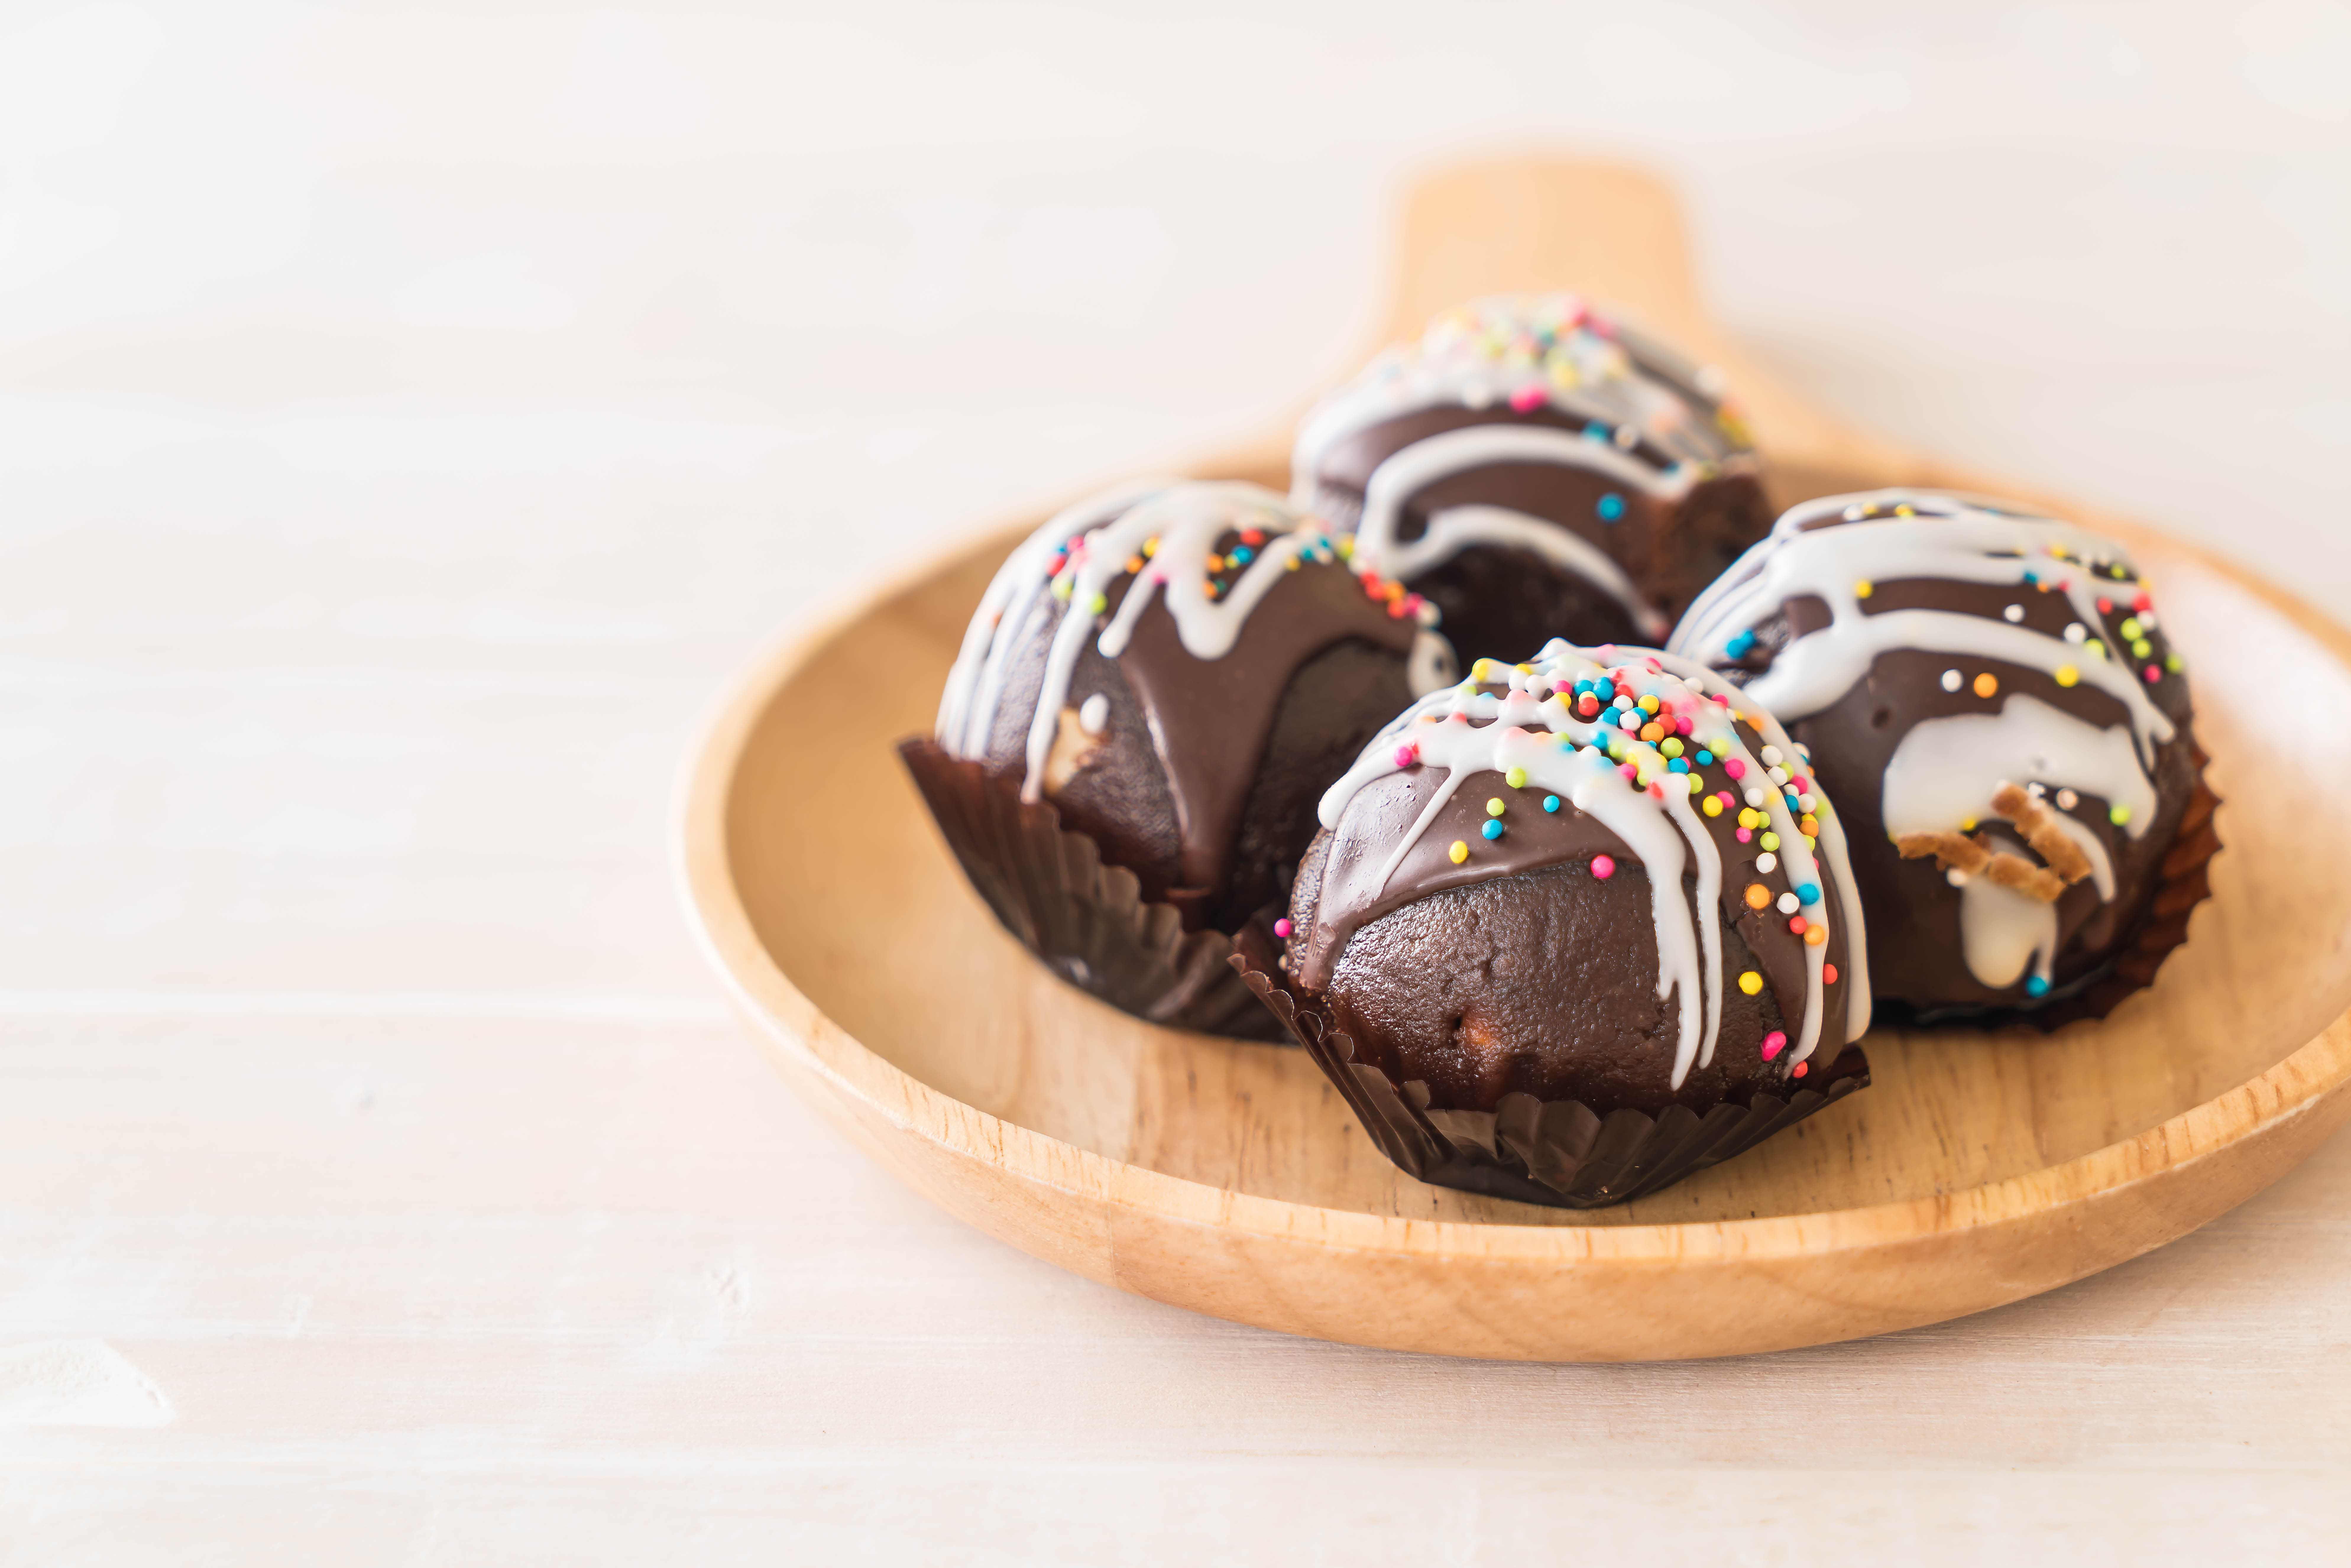 Four chocolate truffles with drizzled white icing on a wooden plate in front of a white background.